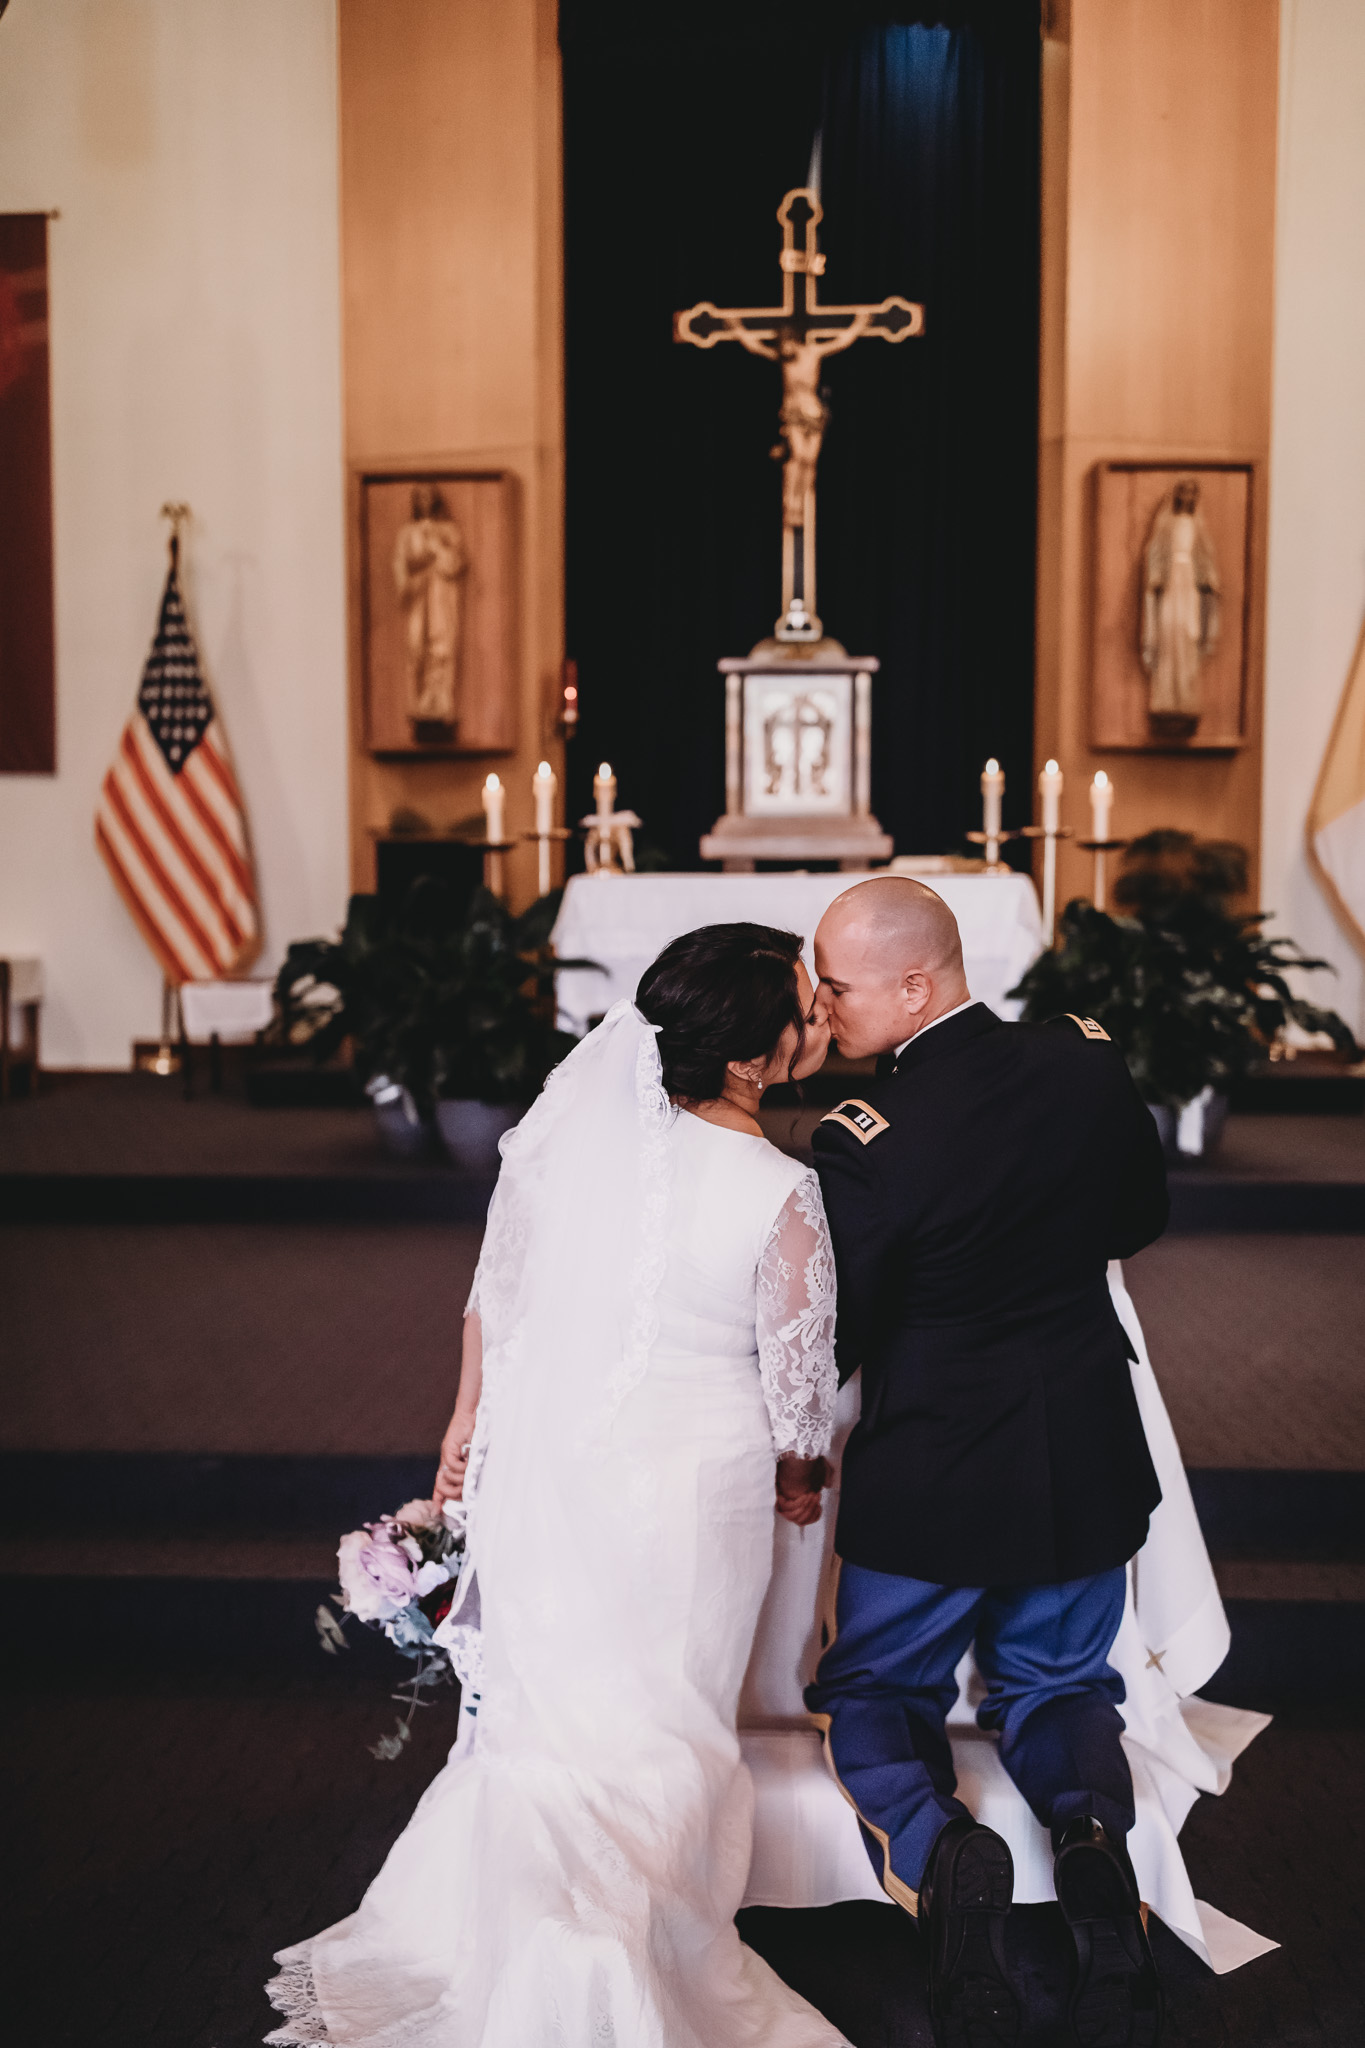 Service Member and Bride Kissing at Alter